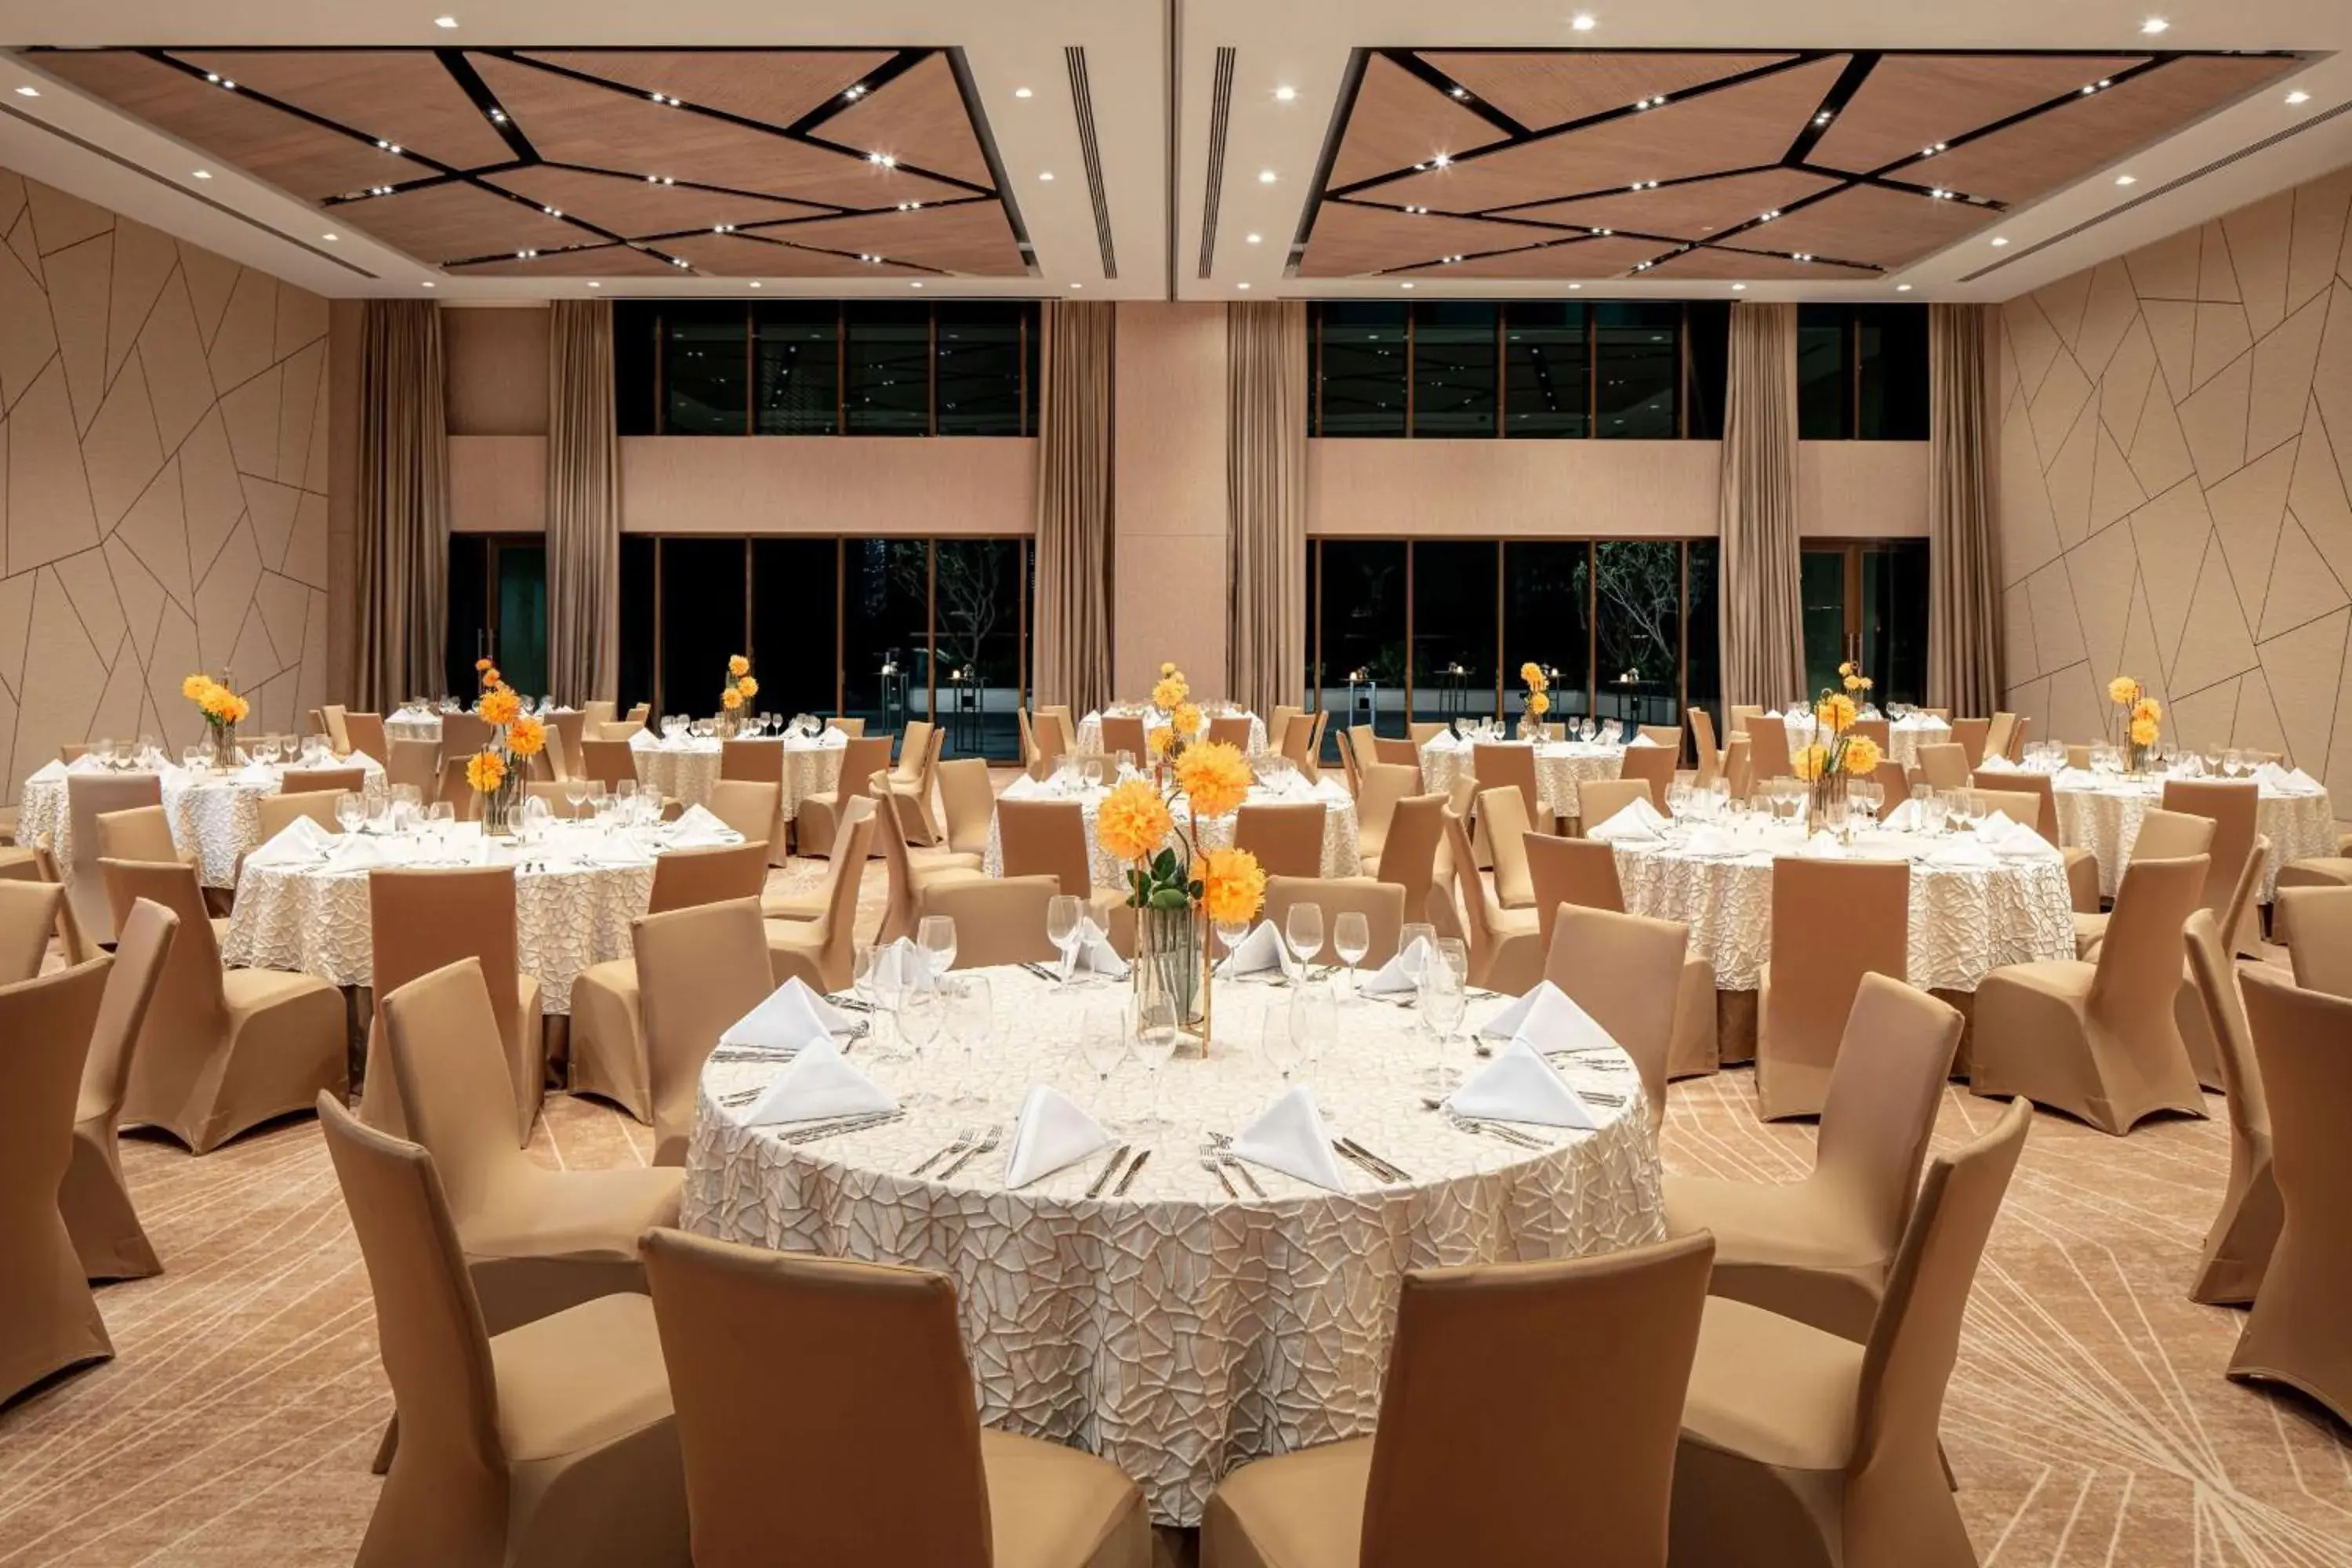 Meeting/conference room, Banquet Facilities in DoubleTree by Hilton Dubai M Square Hotel & Residences